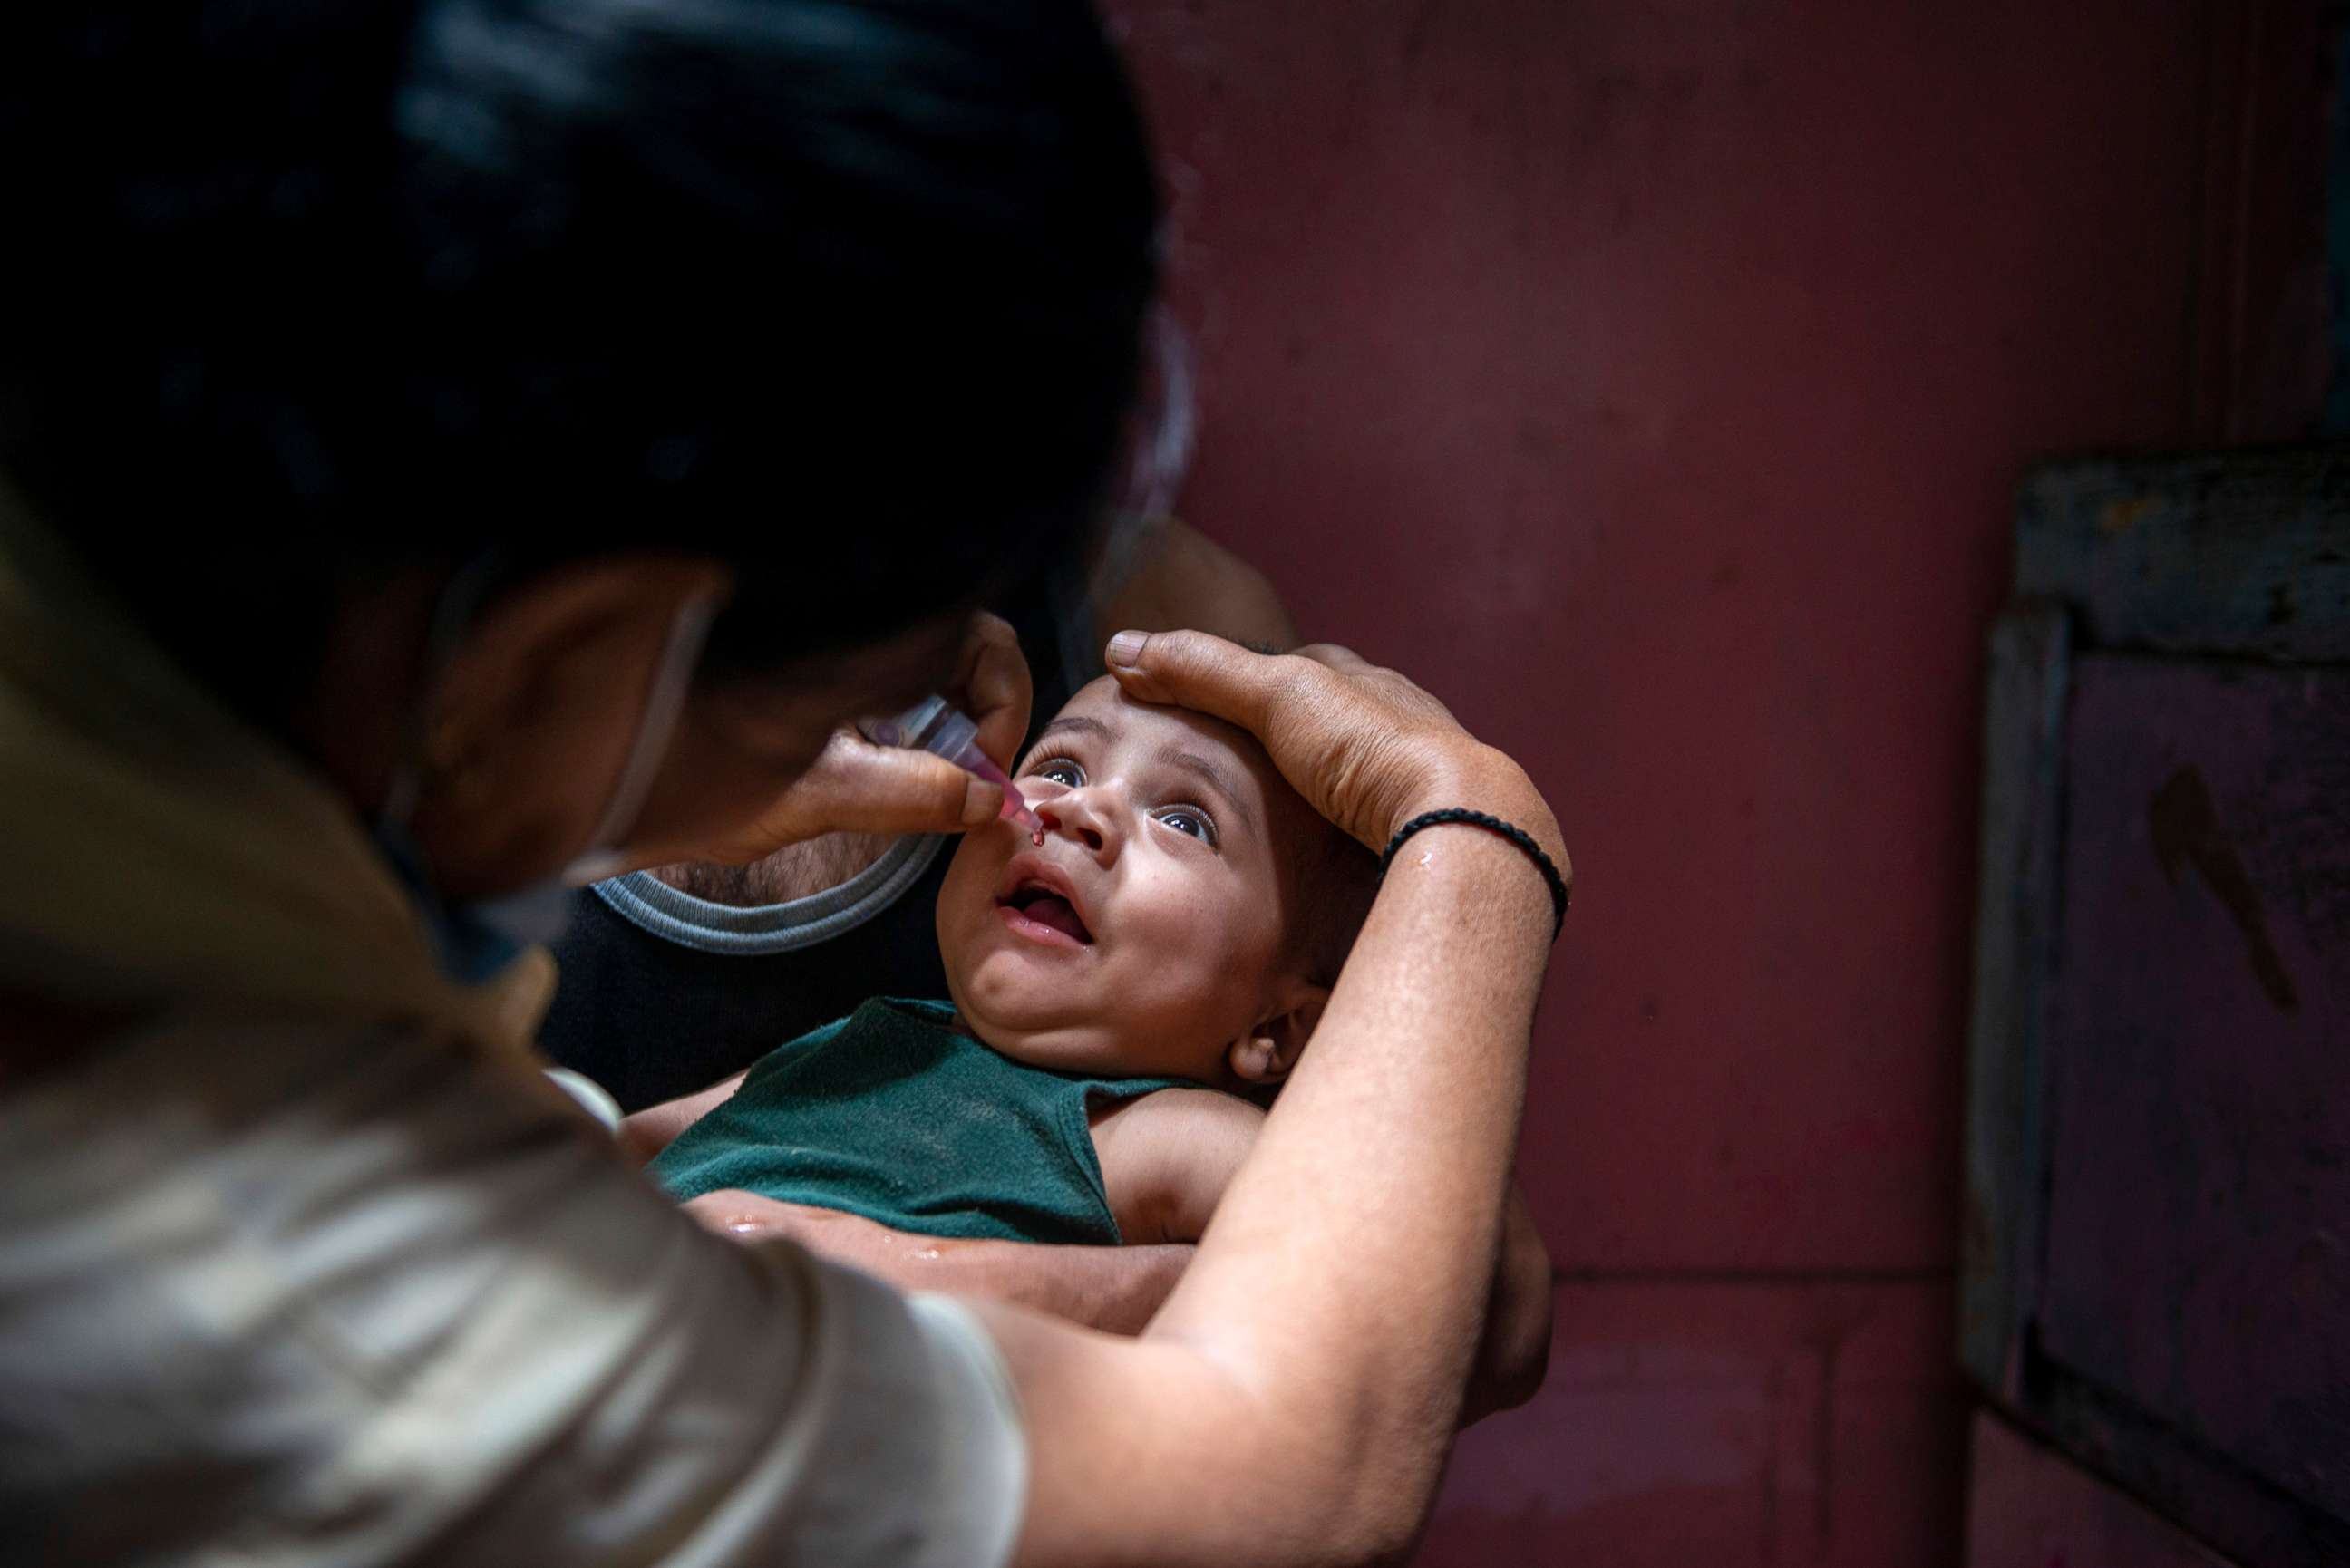 PHOTO: A health worker administers a dose of polio vaccine to a child during a national polio immunization drive in India, June 27, 2021.